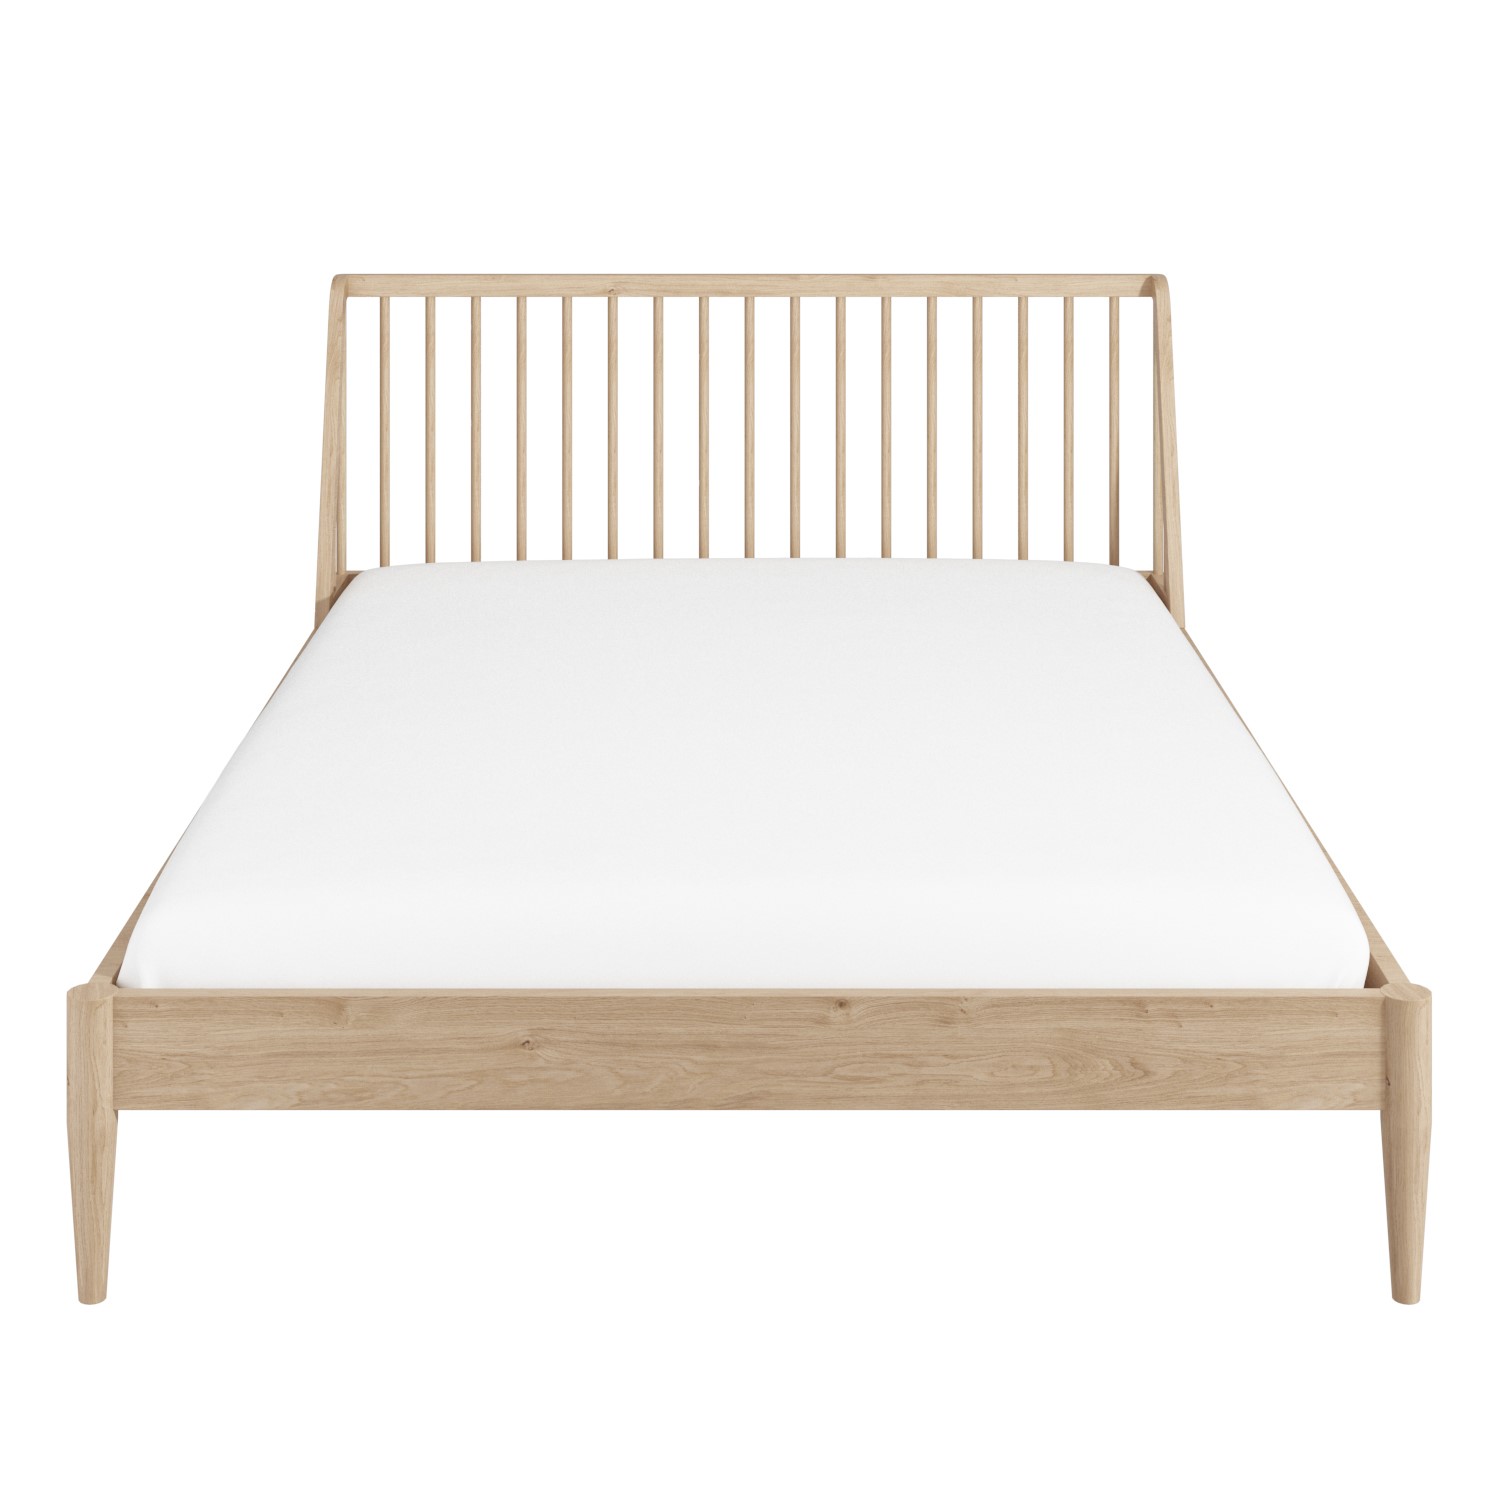 Read more about Wooden spindle mid century king size bed frame saskia